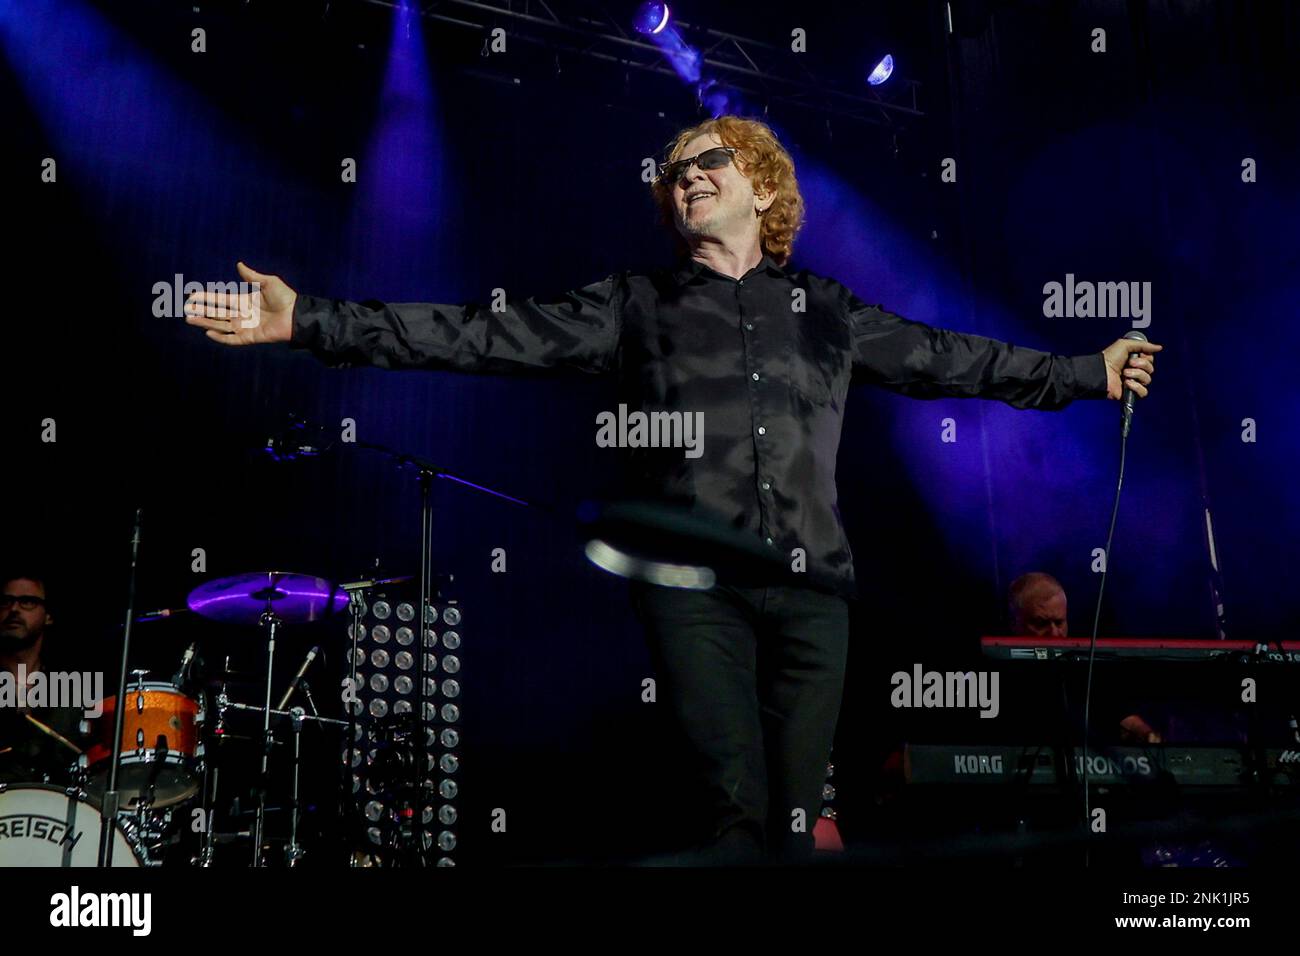 Vocalist Mick Hucknall of the music group Simply Red performs during a  concert at Enrique Tierno Galván Park, June 9, 2022, in Madrid, Spain.  Simply Red is an English pop band that